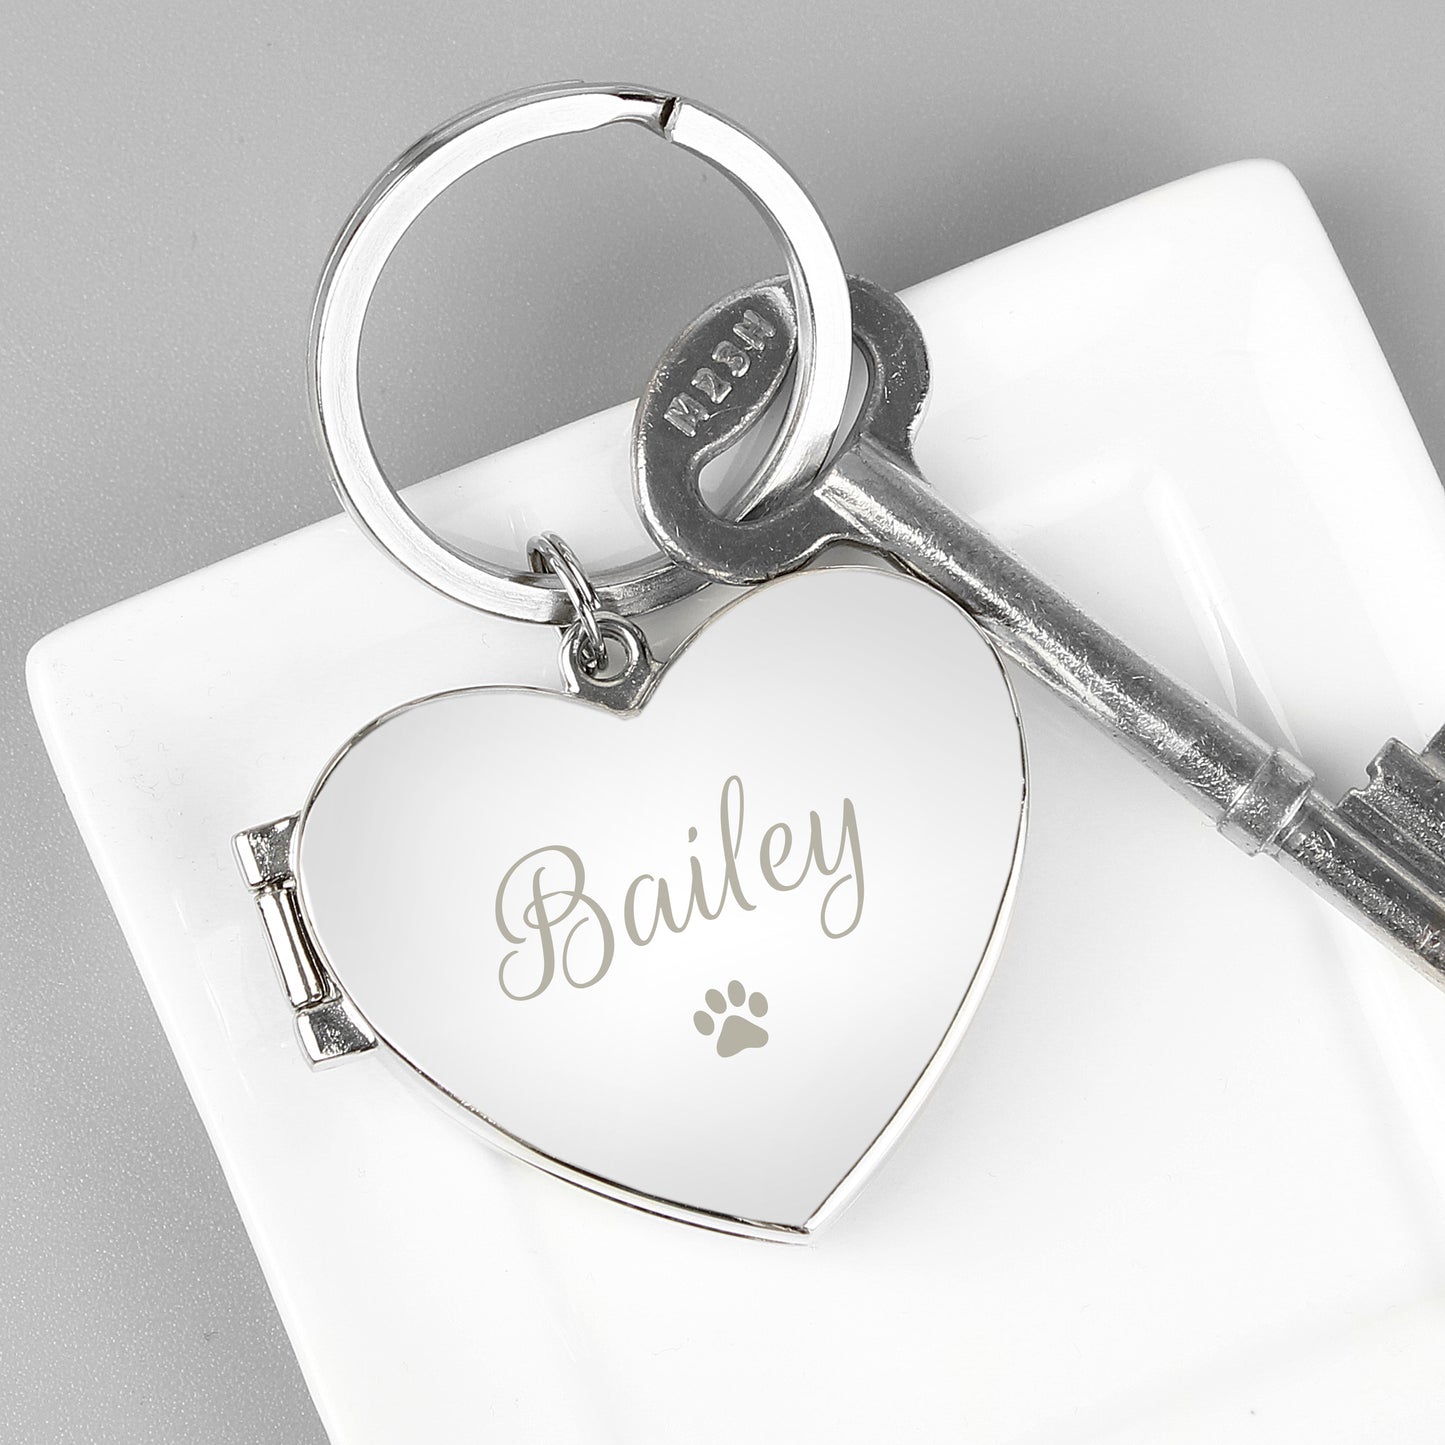 nickel plated opening locket key ring with paw print, engraved with your pet's name